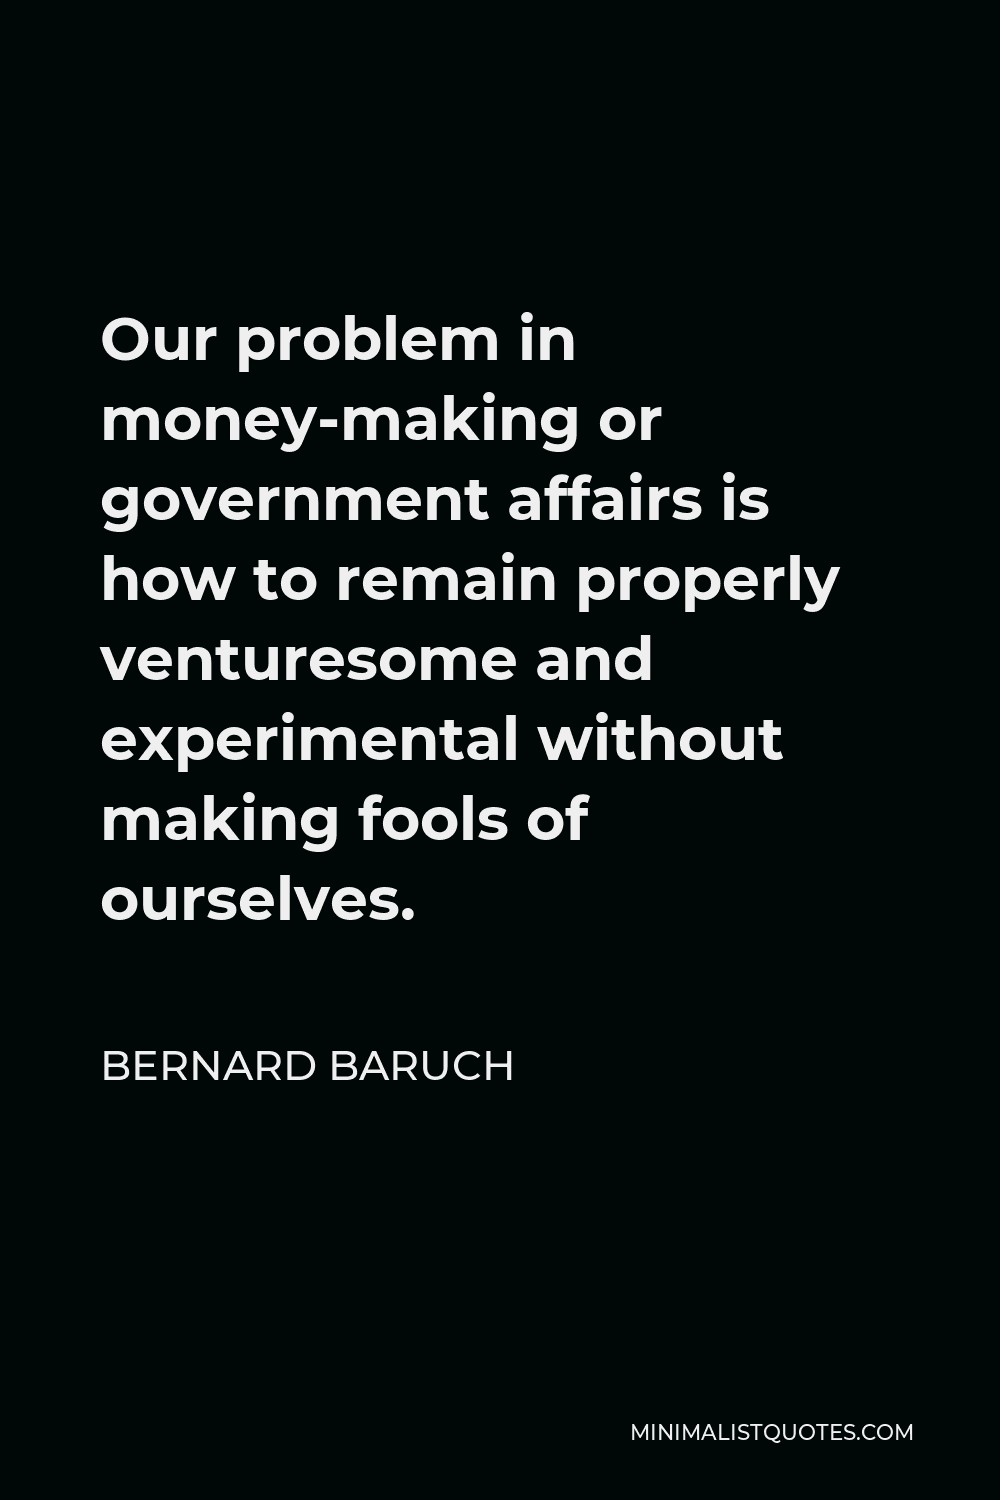 Bernard Baruch Quote - Our problem in money-making or government affairs is how to remain properly venturesome and experimental without making fools of ourselves.